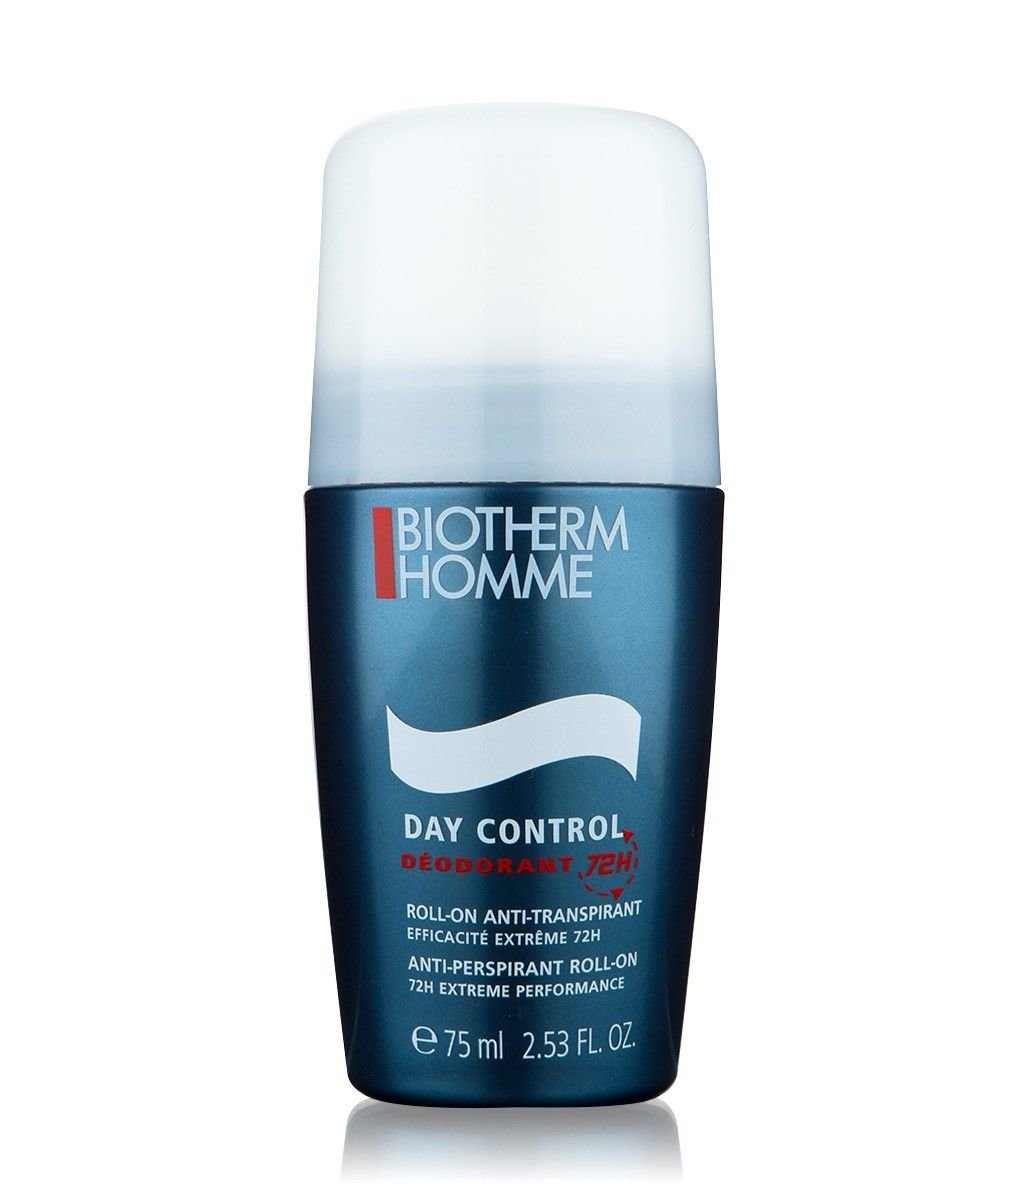 Biotherm Homme Day Control 72h RollOn